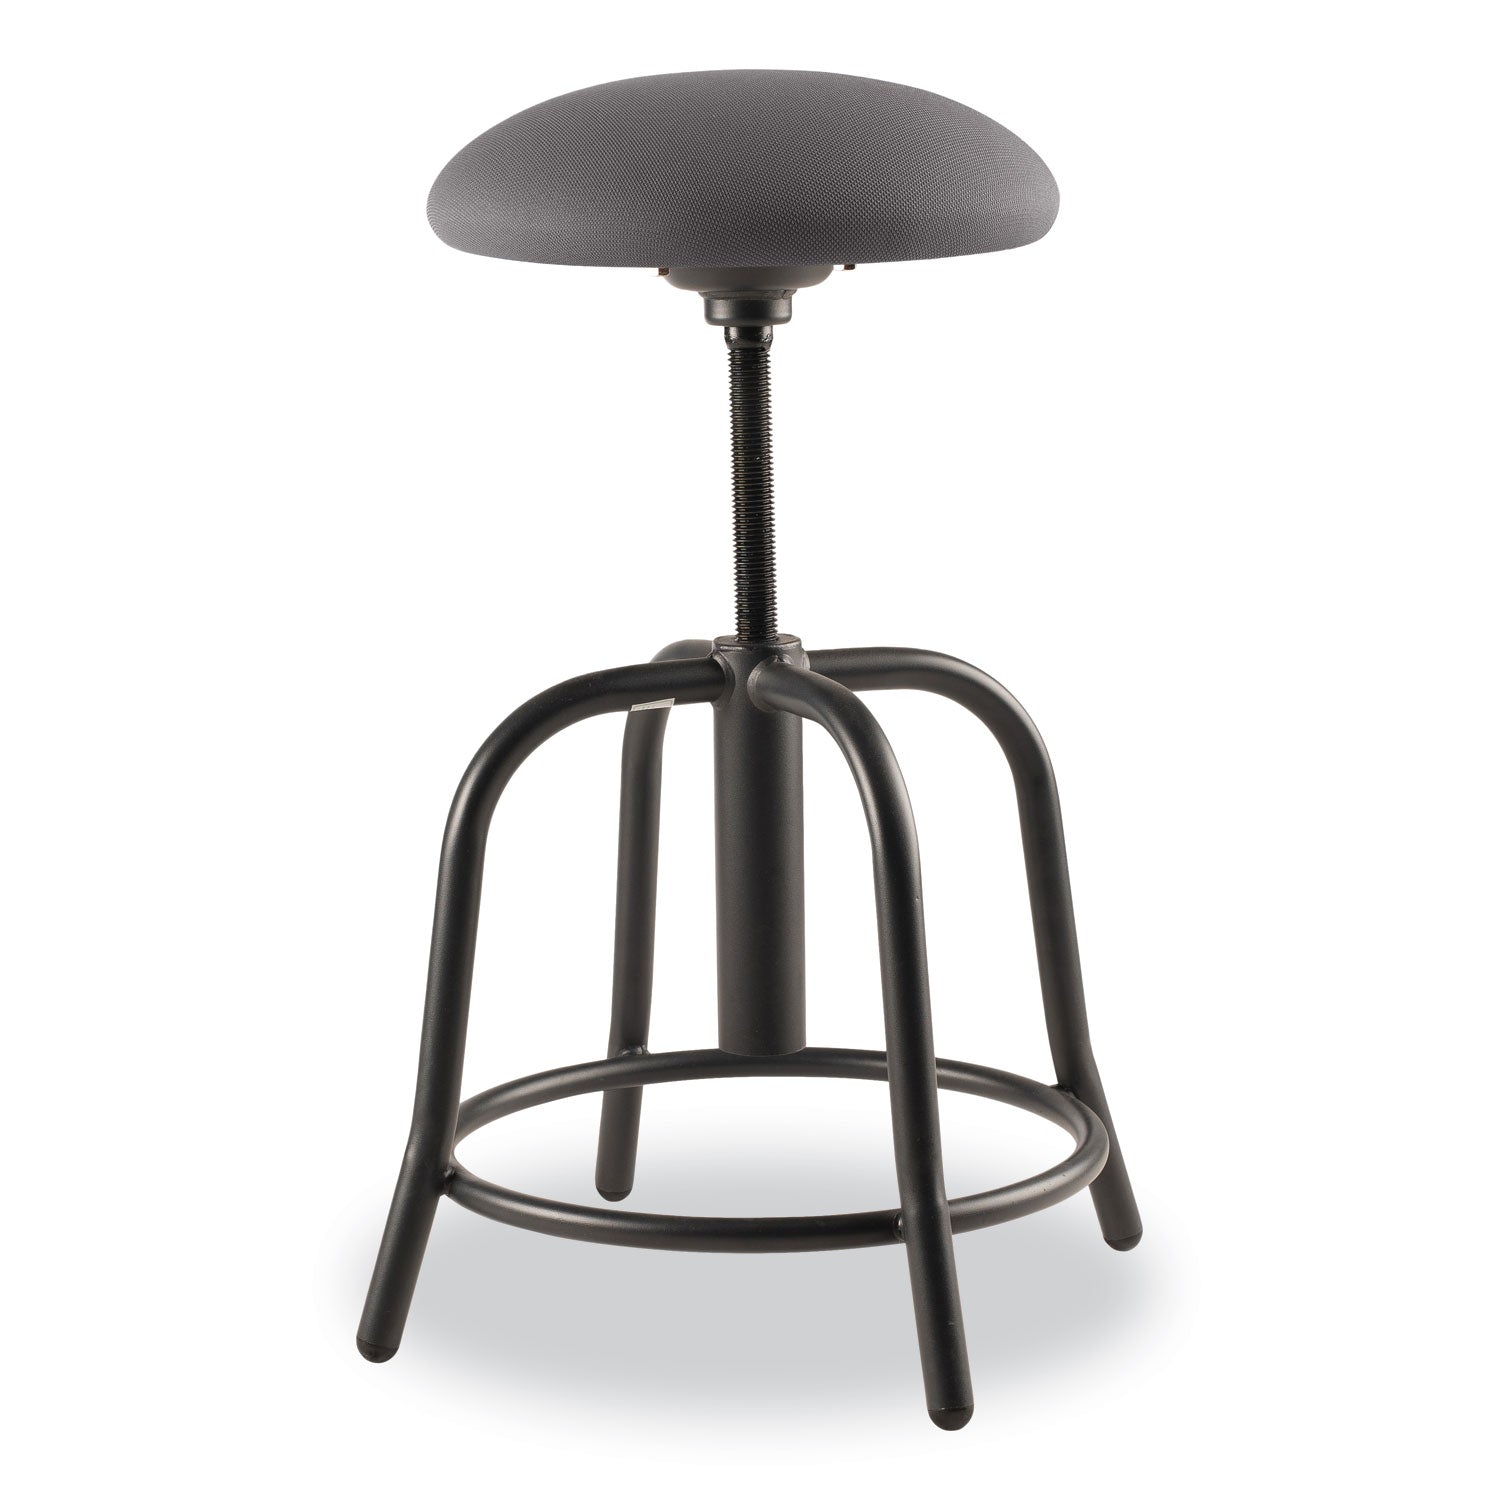 6800-series-height-adj-fabric-seat-stool-supports-300-lb-18-to-25-height-charcoal-seat-black-base-ships-in-1-3-bus-days_nps6820s10 - 2